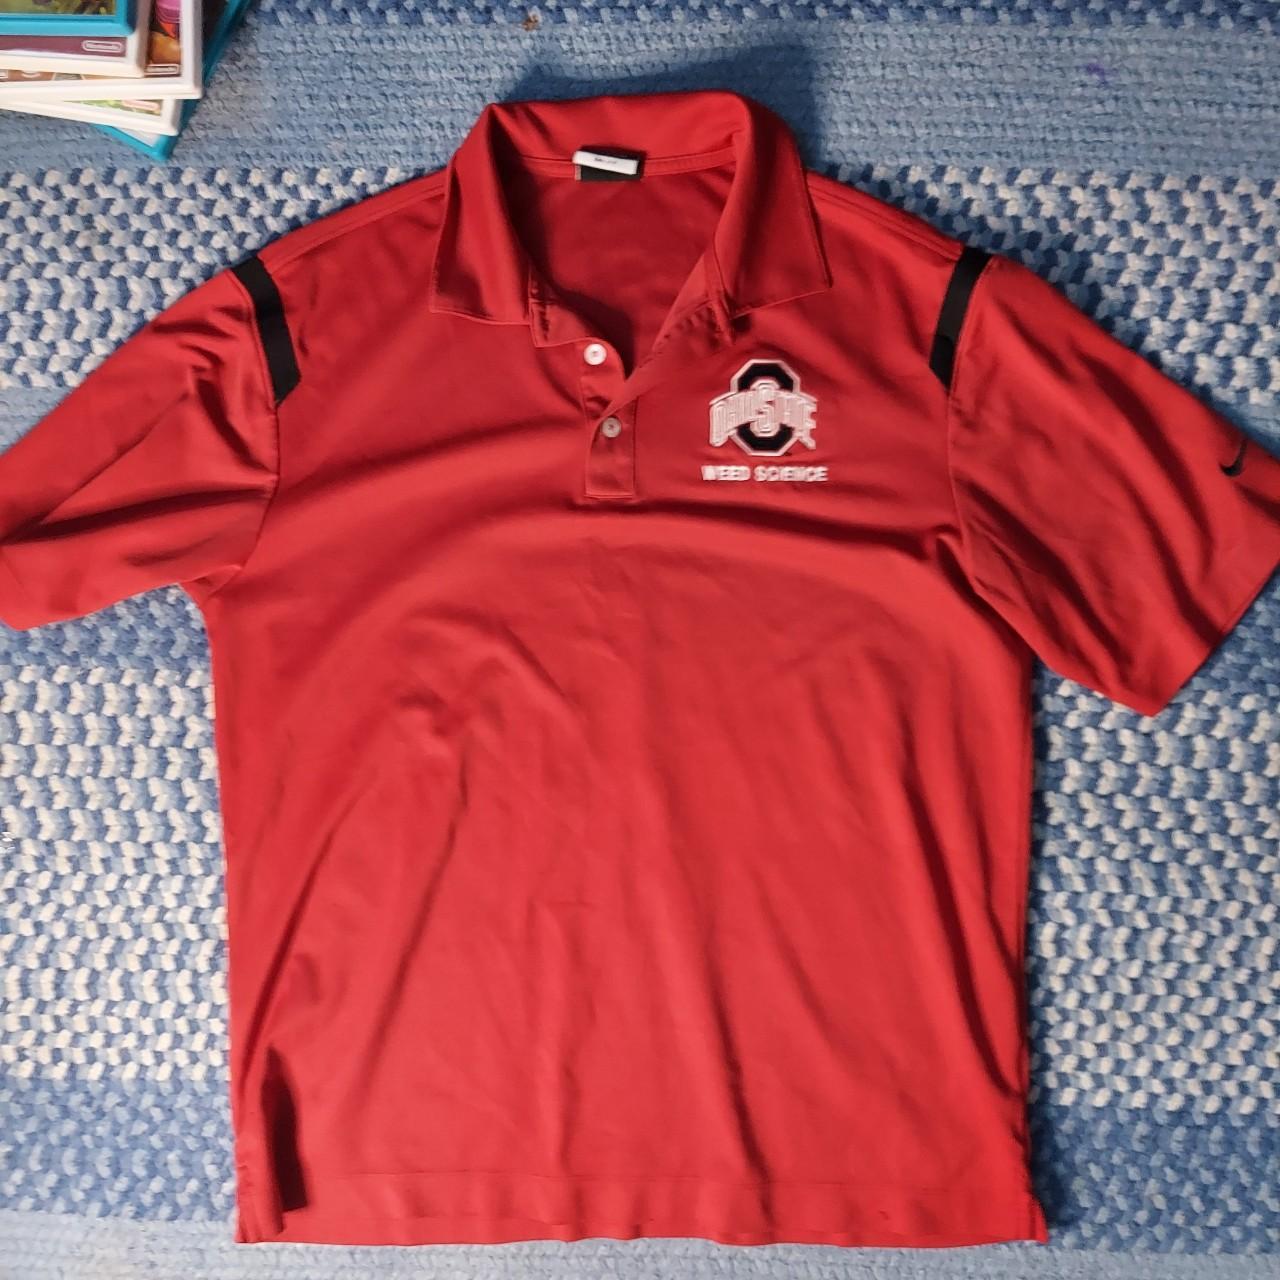 Nike Men's Black and Red Polo-shirts (3)